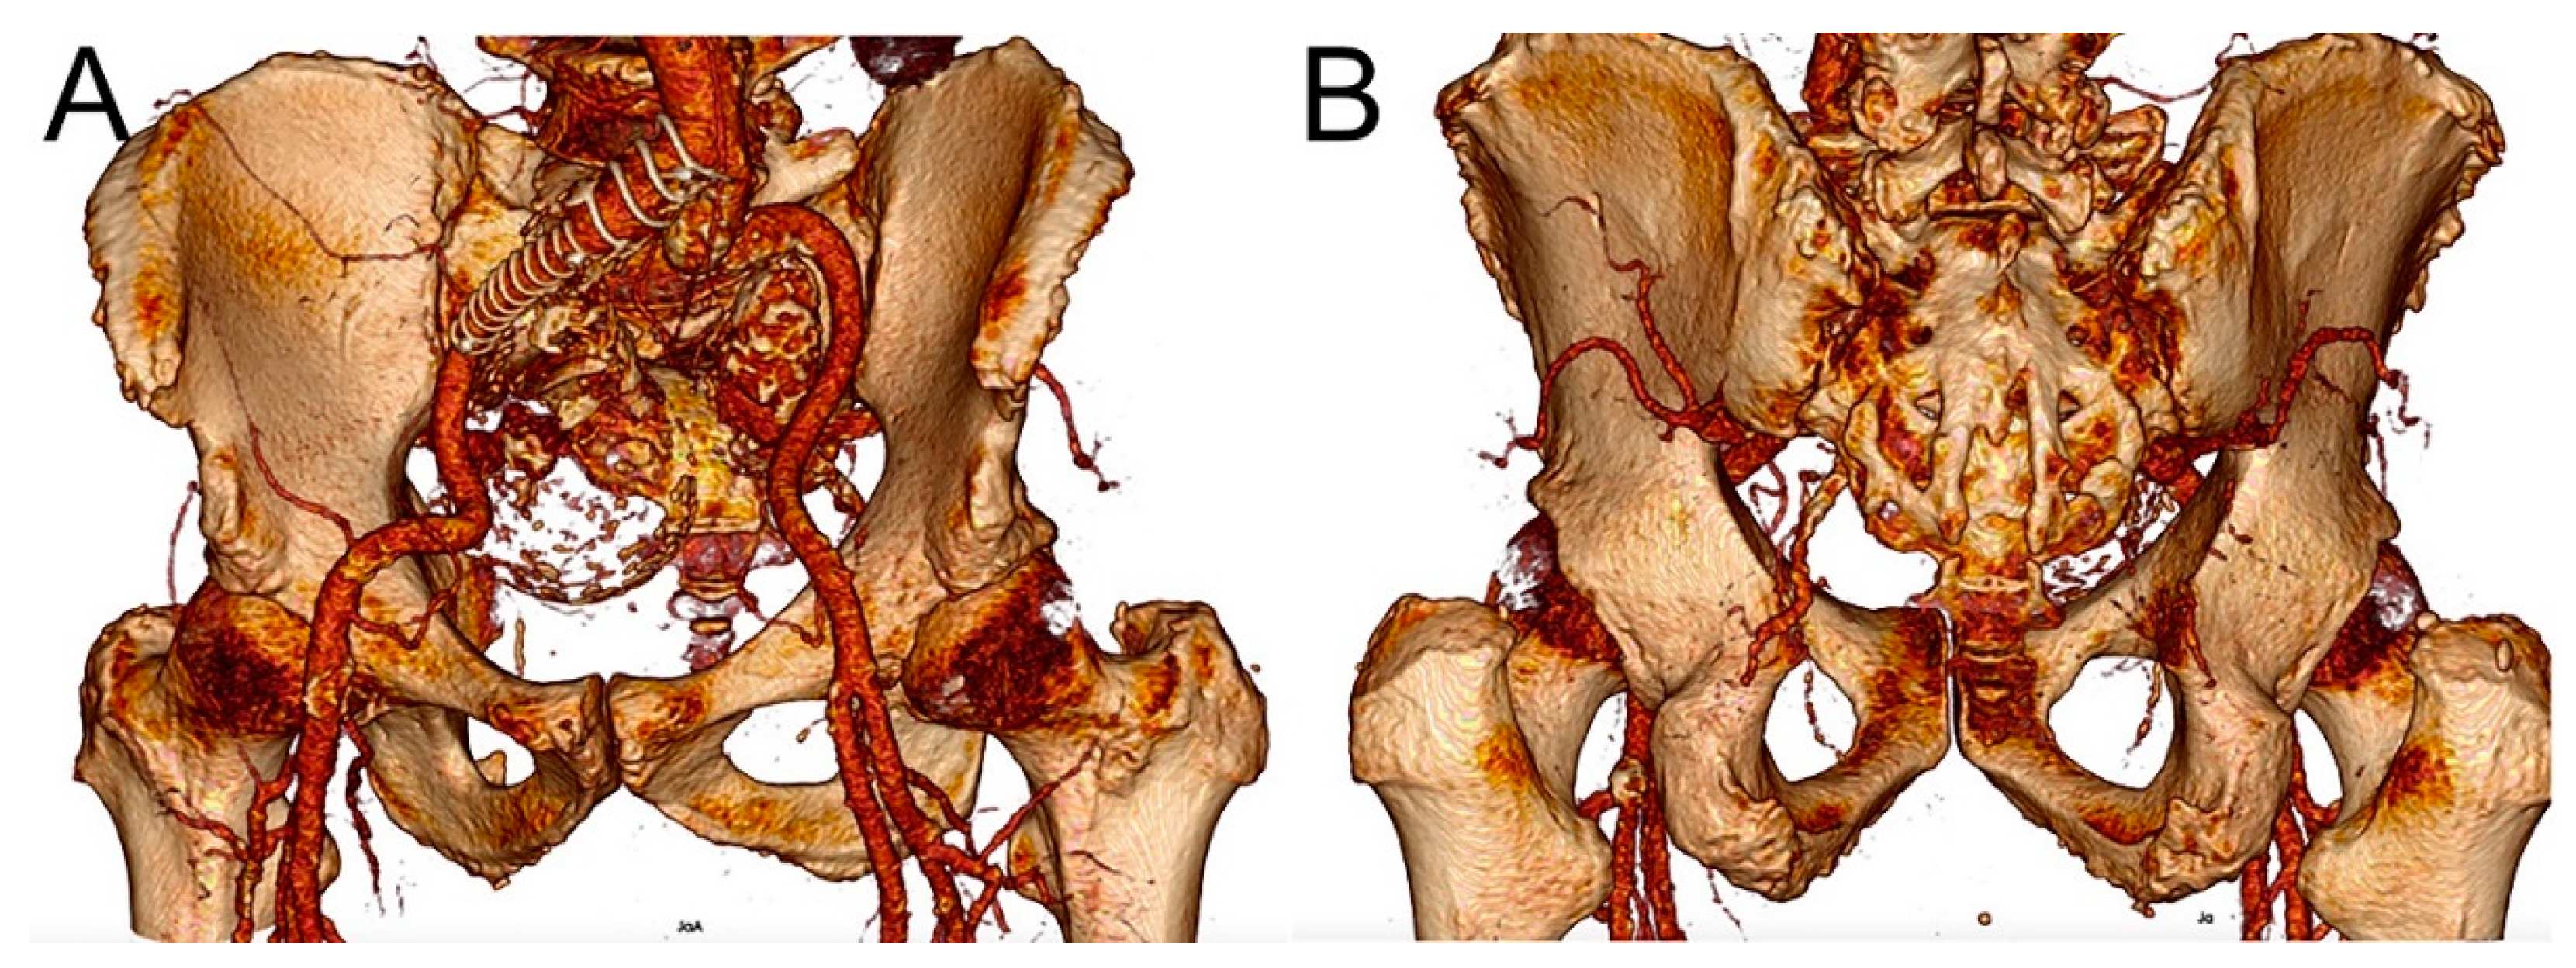 superior gluteal artery model